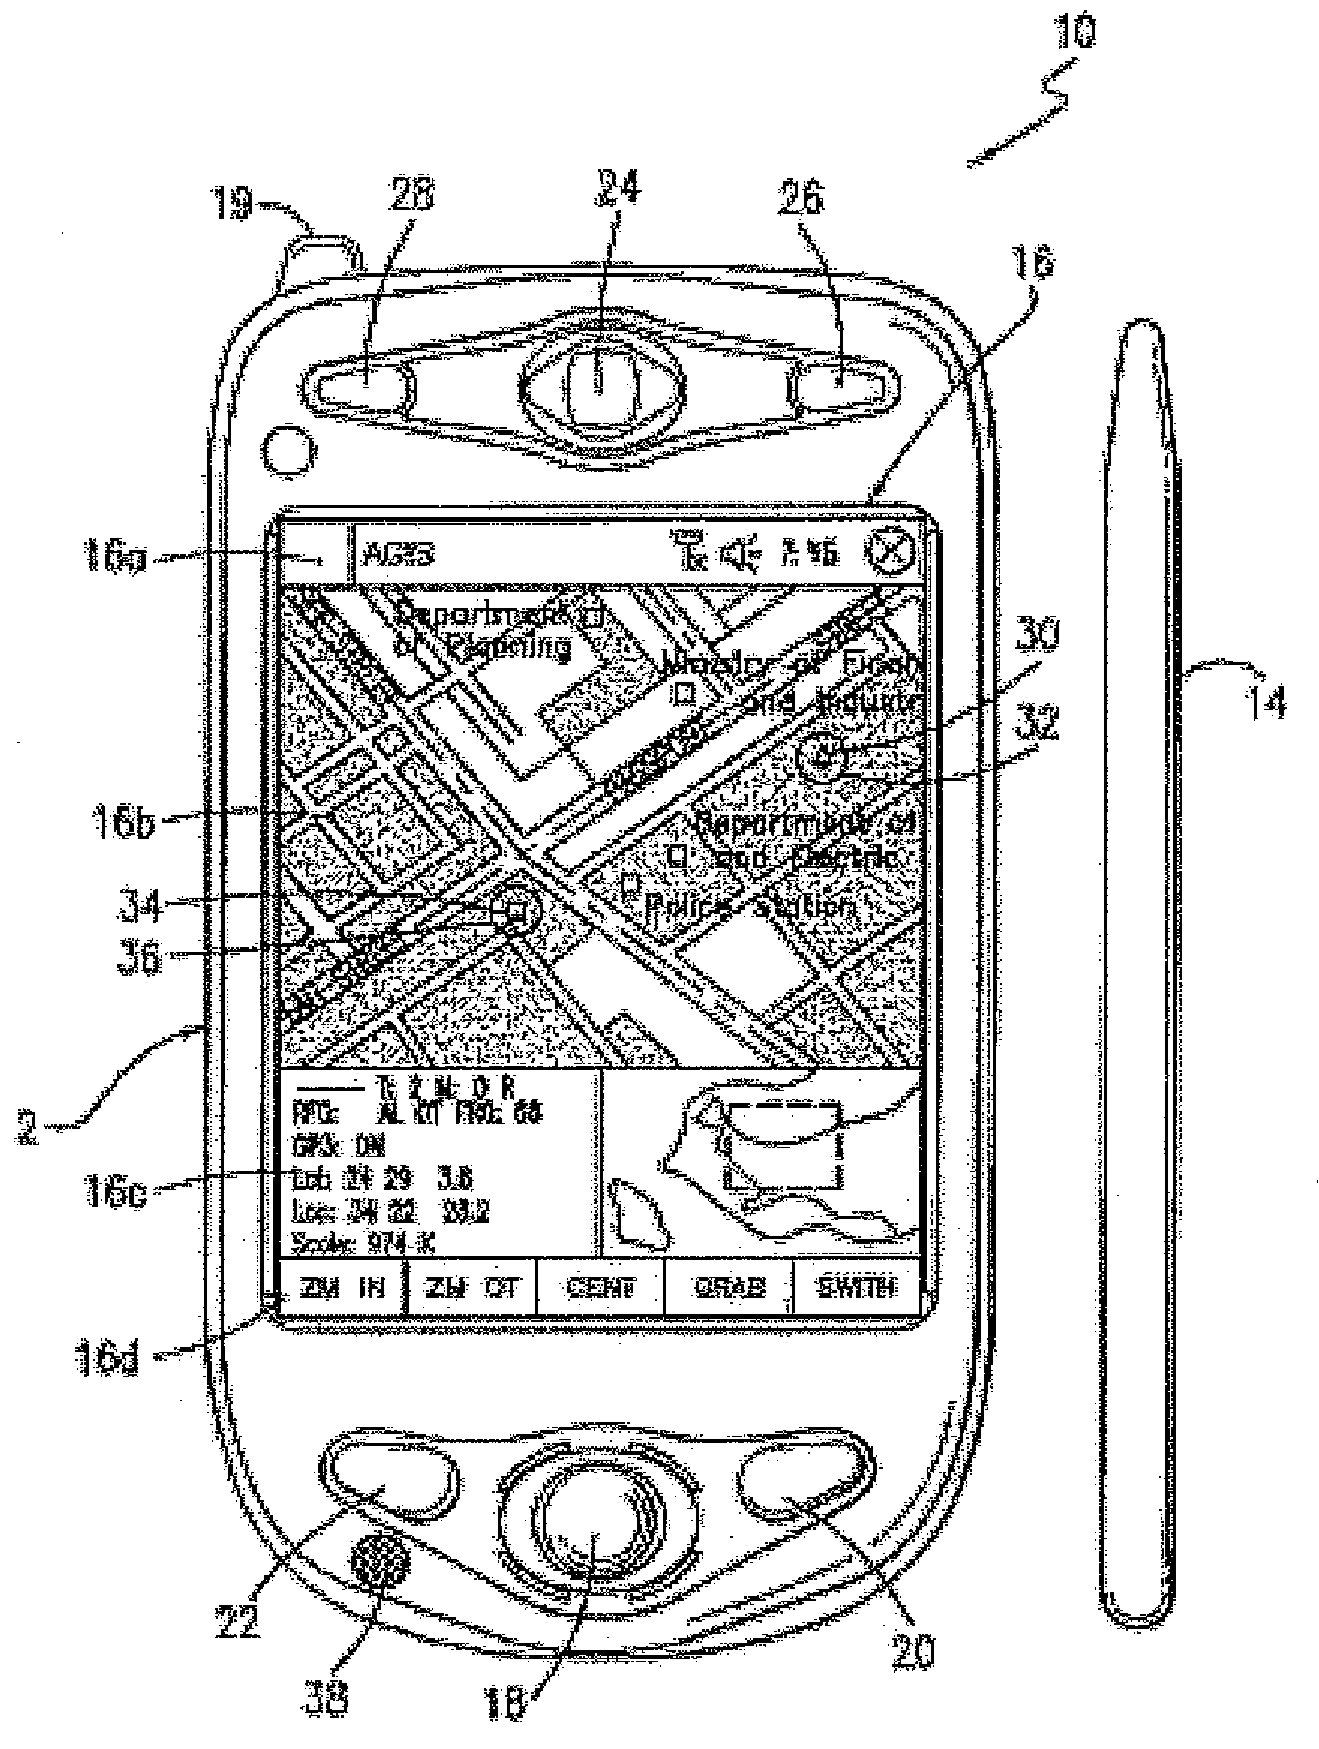 Method of utilizing forced alerts for interactive remote communications